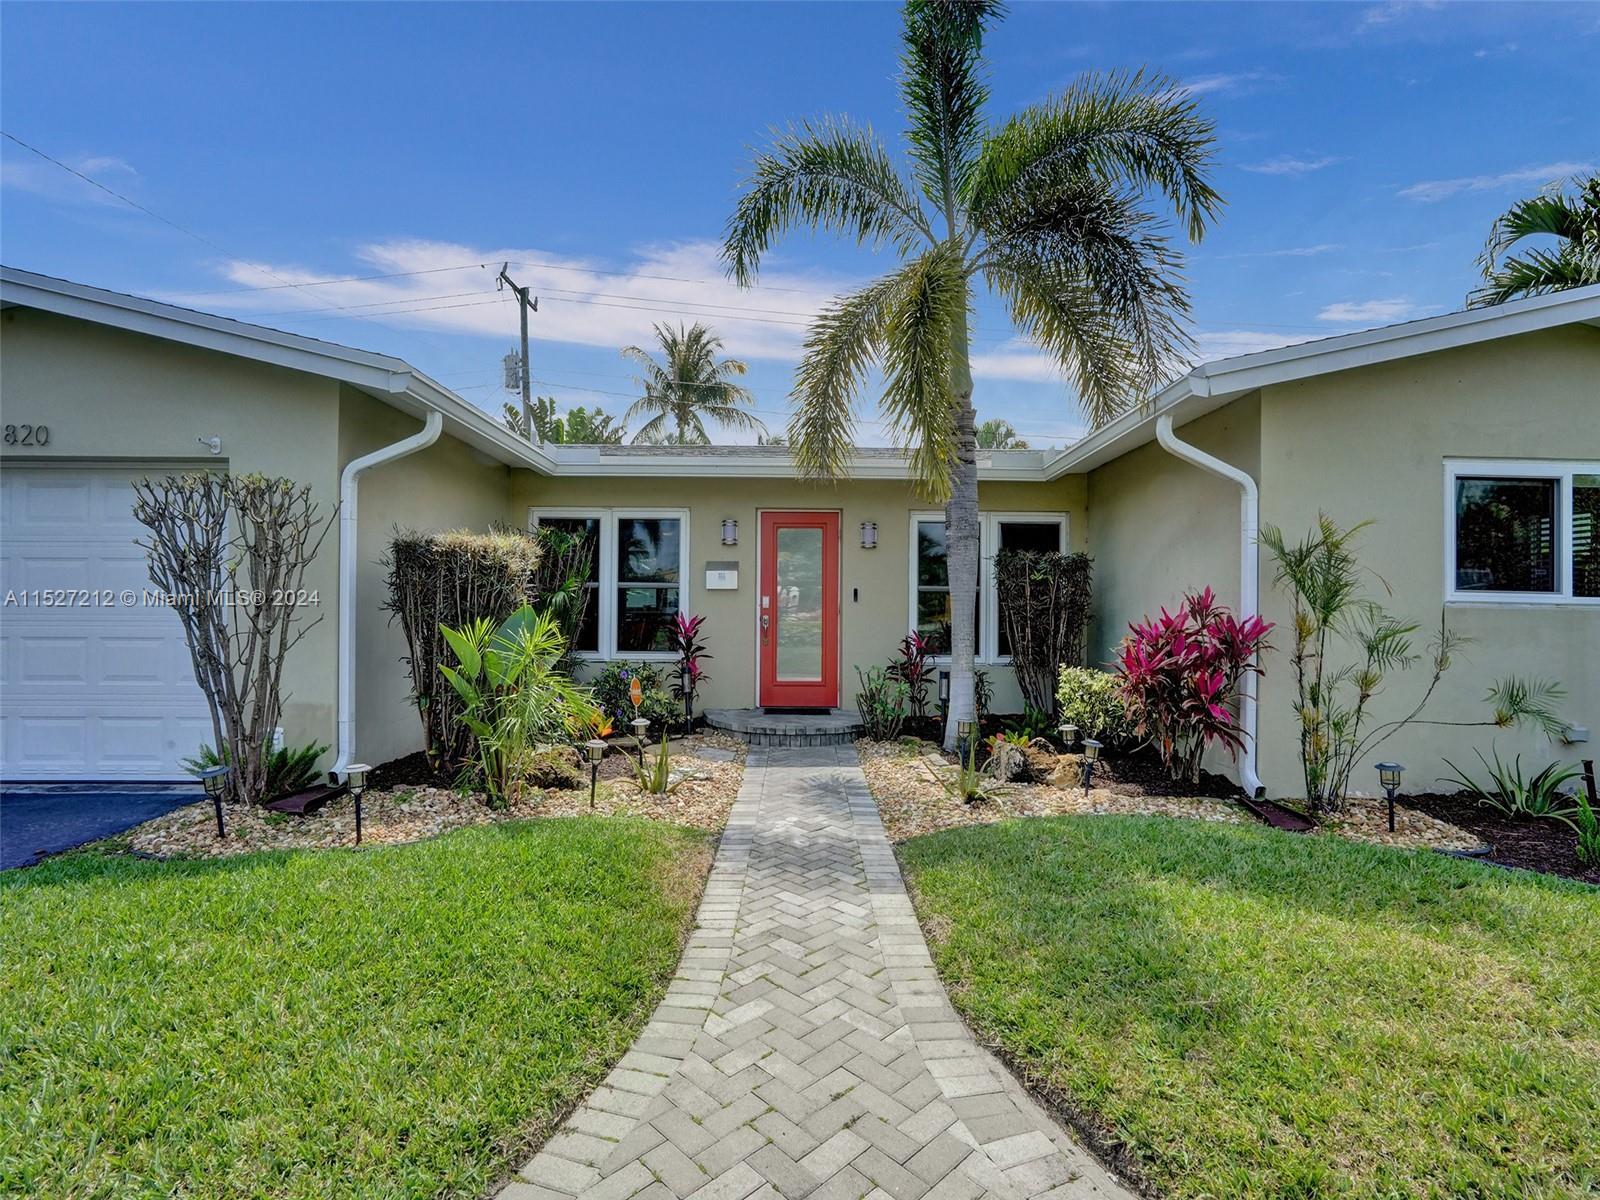 Serene retreat right in the heart of Fort Lauderdale’s HIGHLY desirable East Coral Ridge neighborhoo